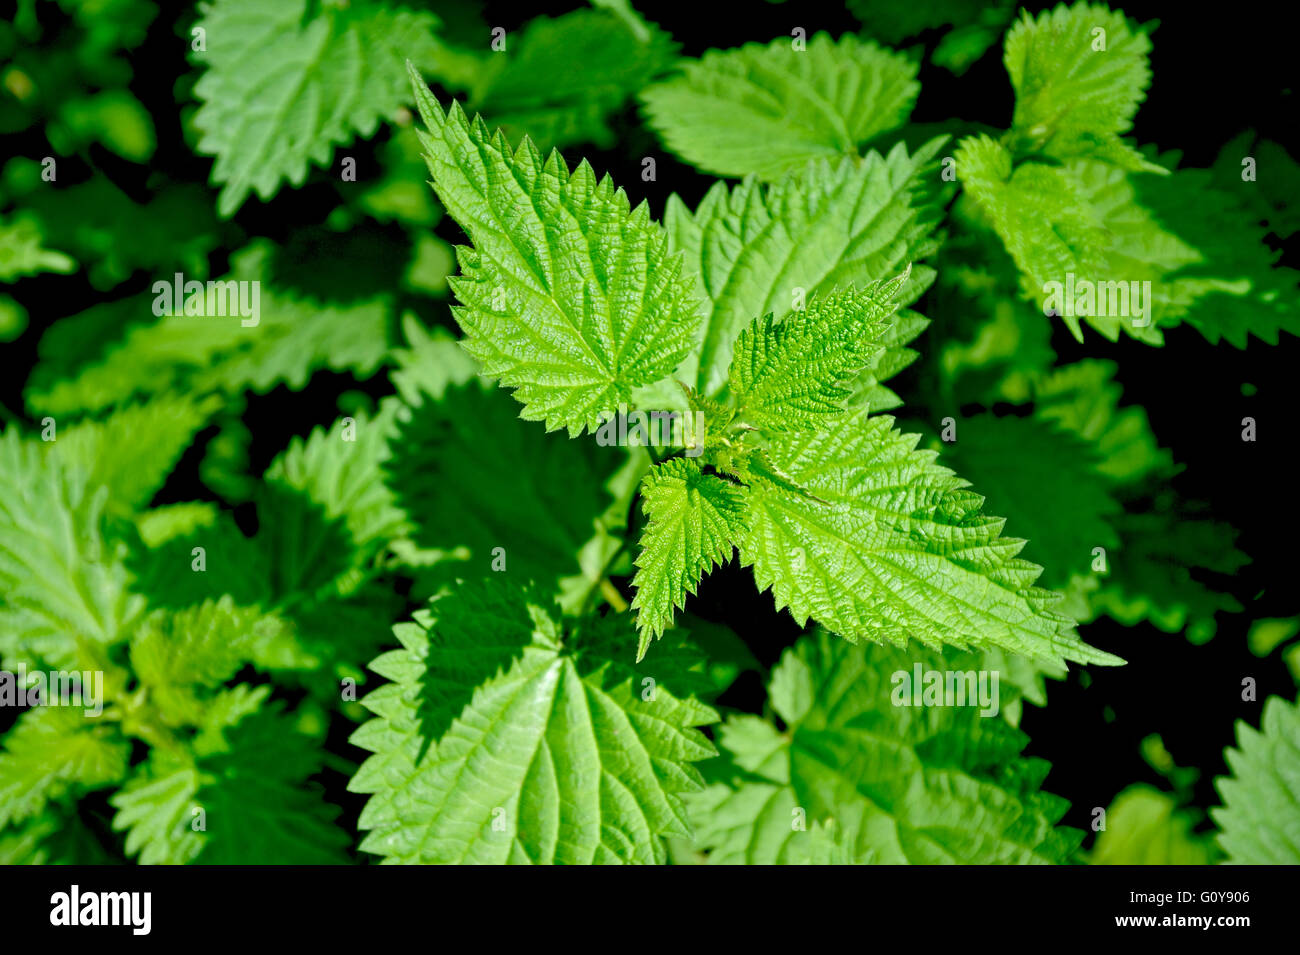 NETTLES GROWING IN THE ENGLISH COUNTRYSIDE Stock Photo